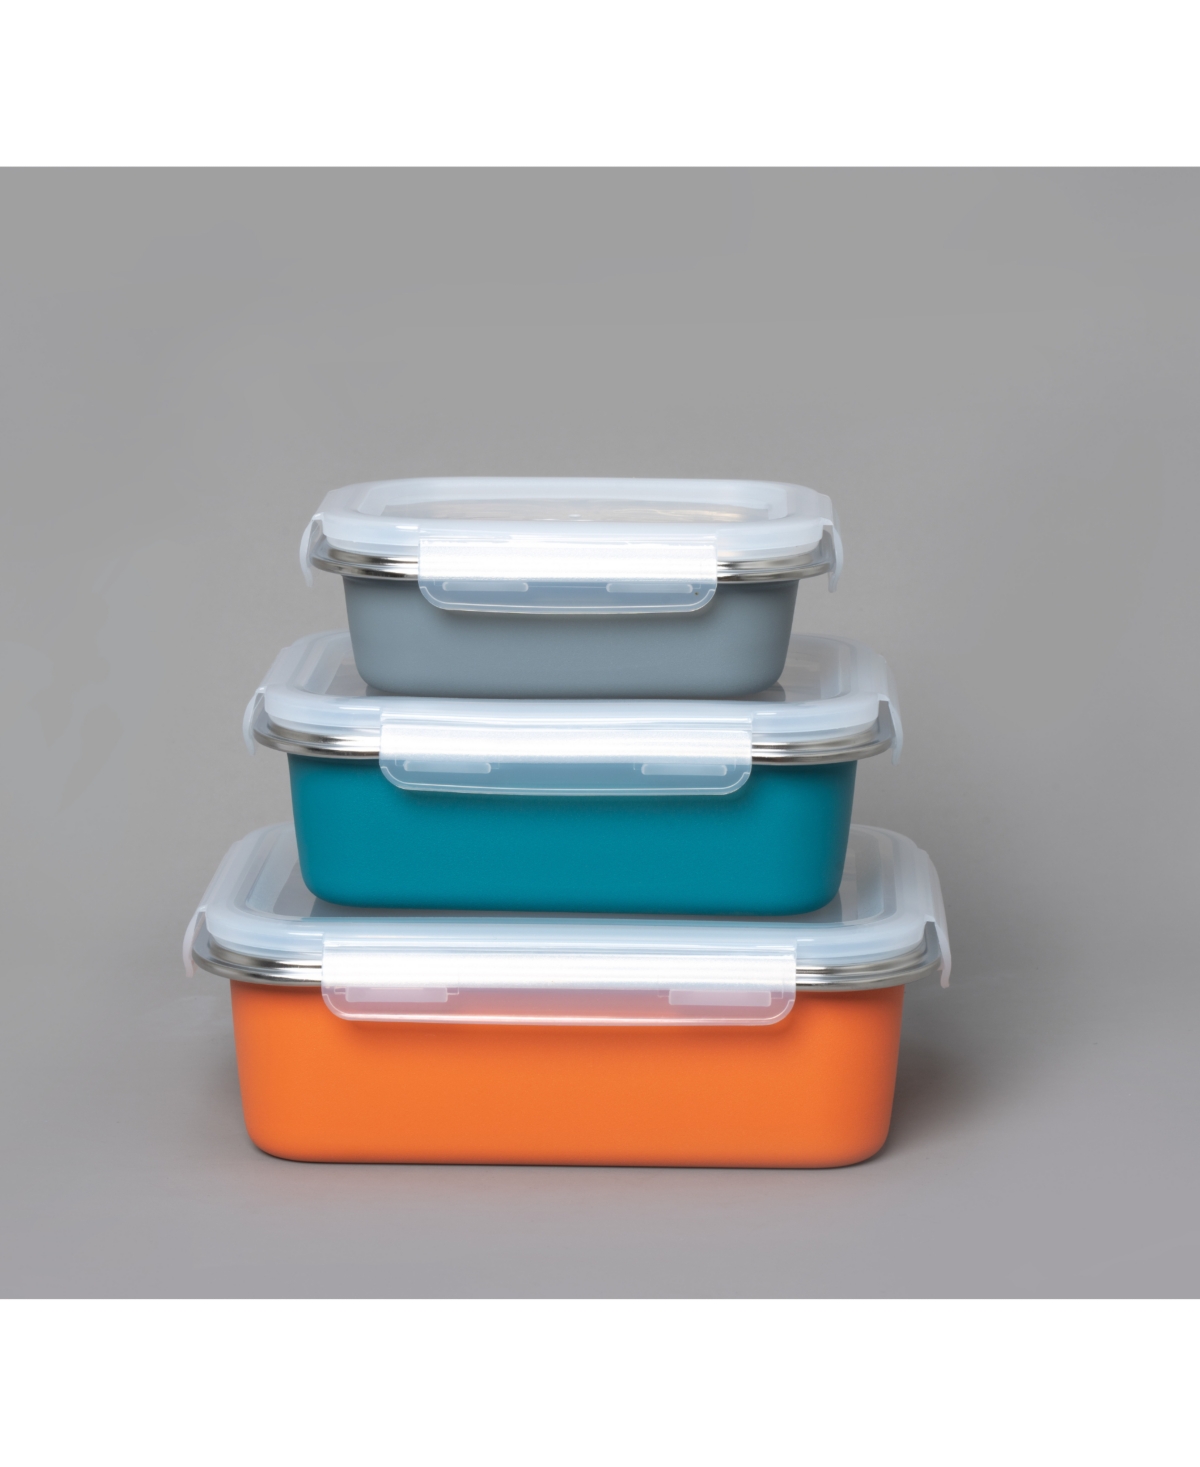 Shop Genicook 3 Pc Container Nestable Stainless Steel Set With Locking Lids In Multicolor